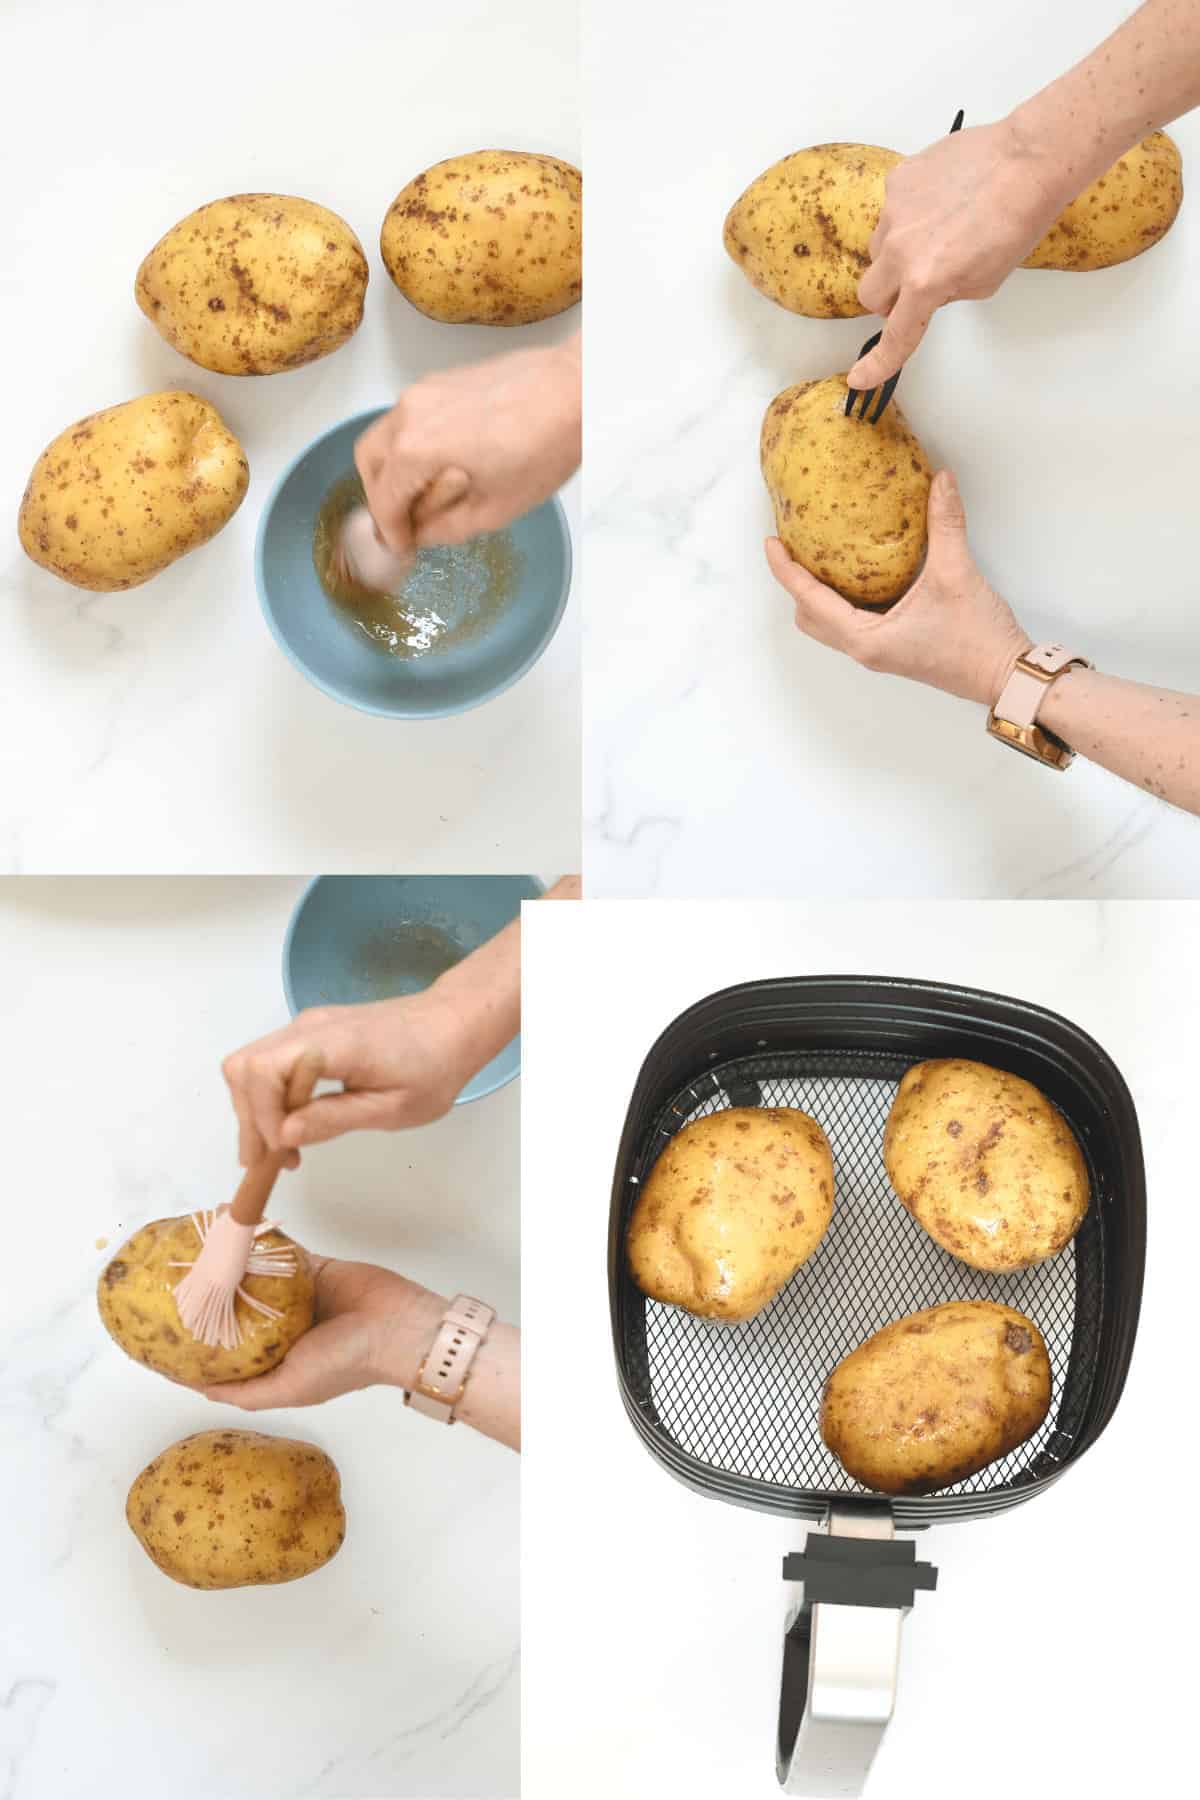 How to make Air Fryer Baked Potatoes